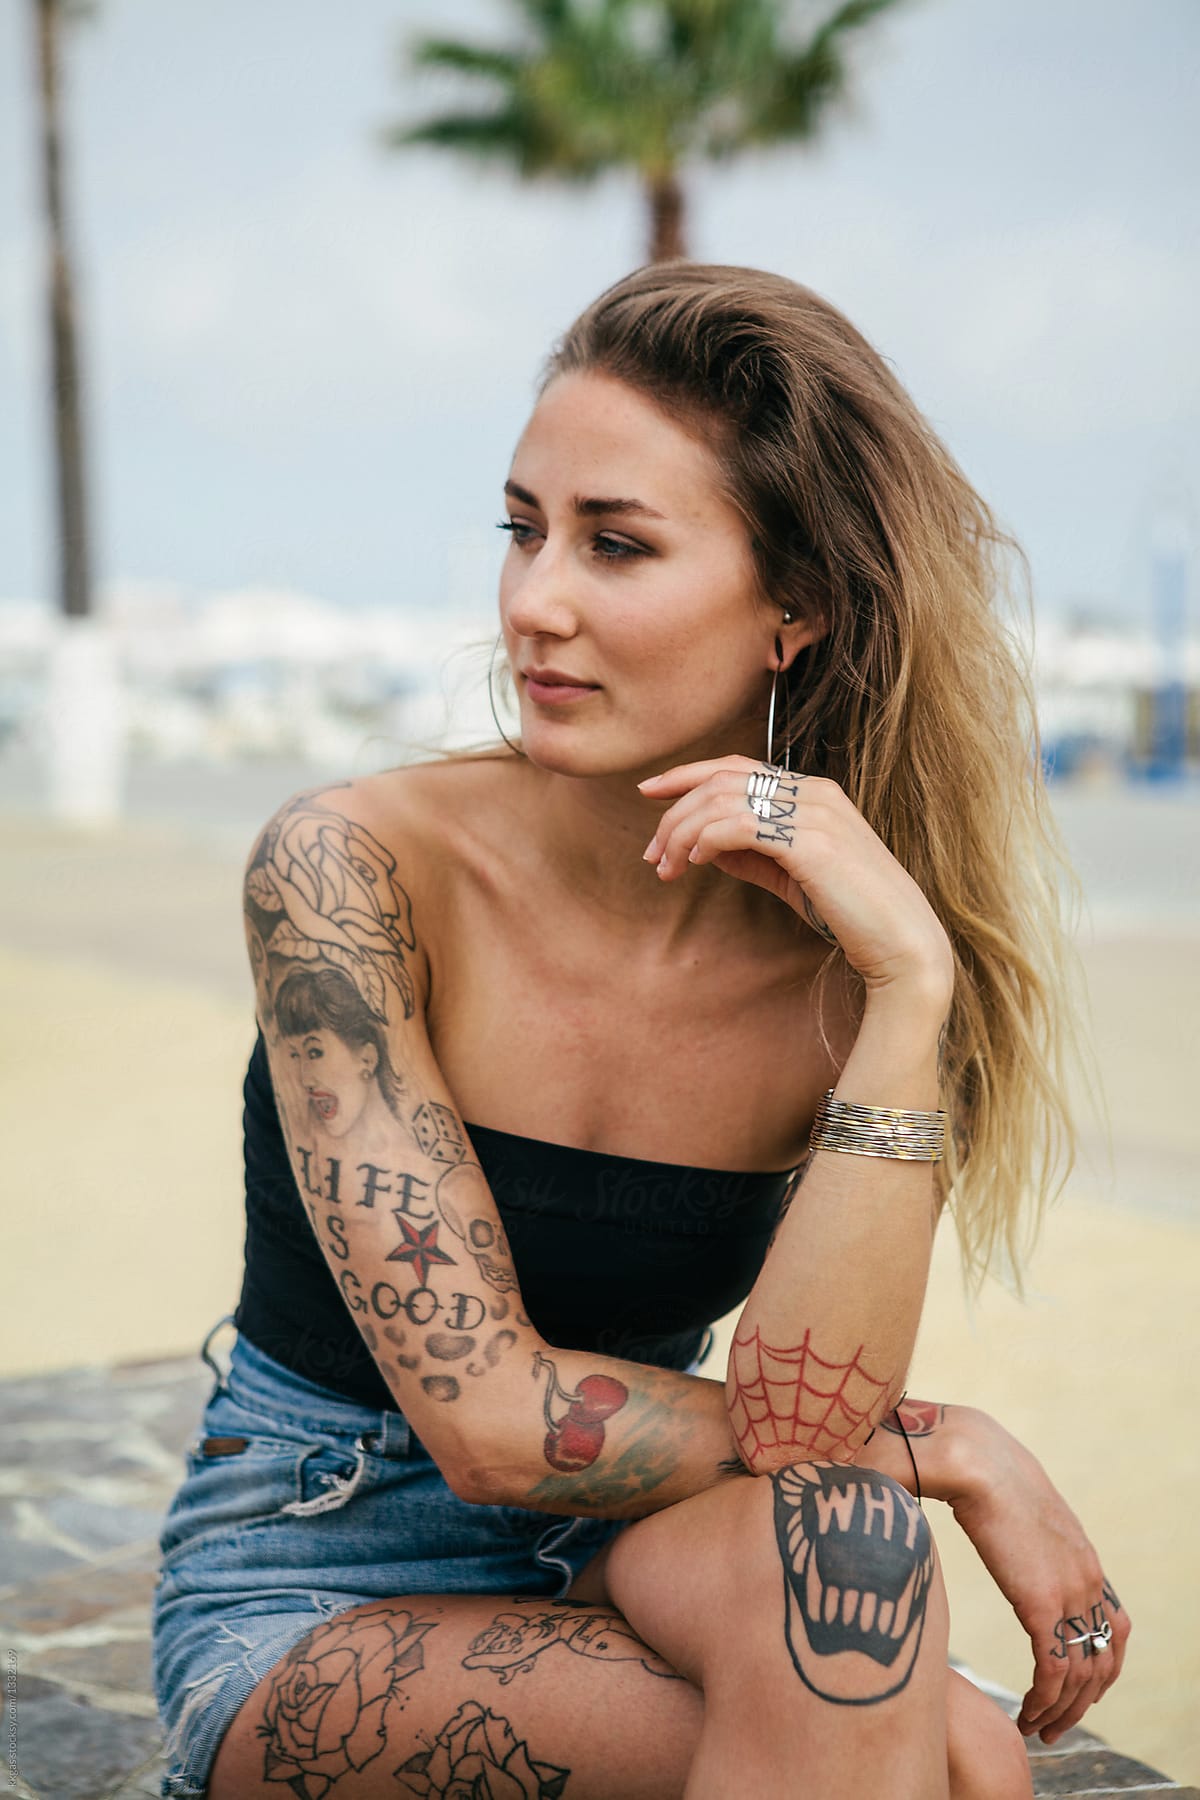 Blonde female with toned body and tattoos Stock Photo by ©ianthraves  65050181